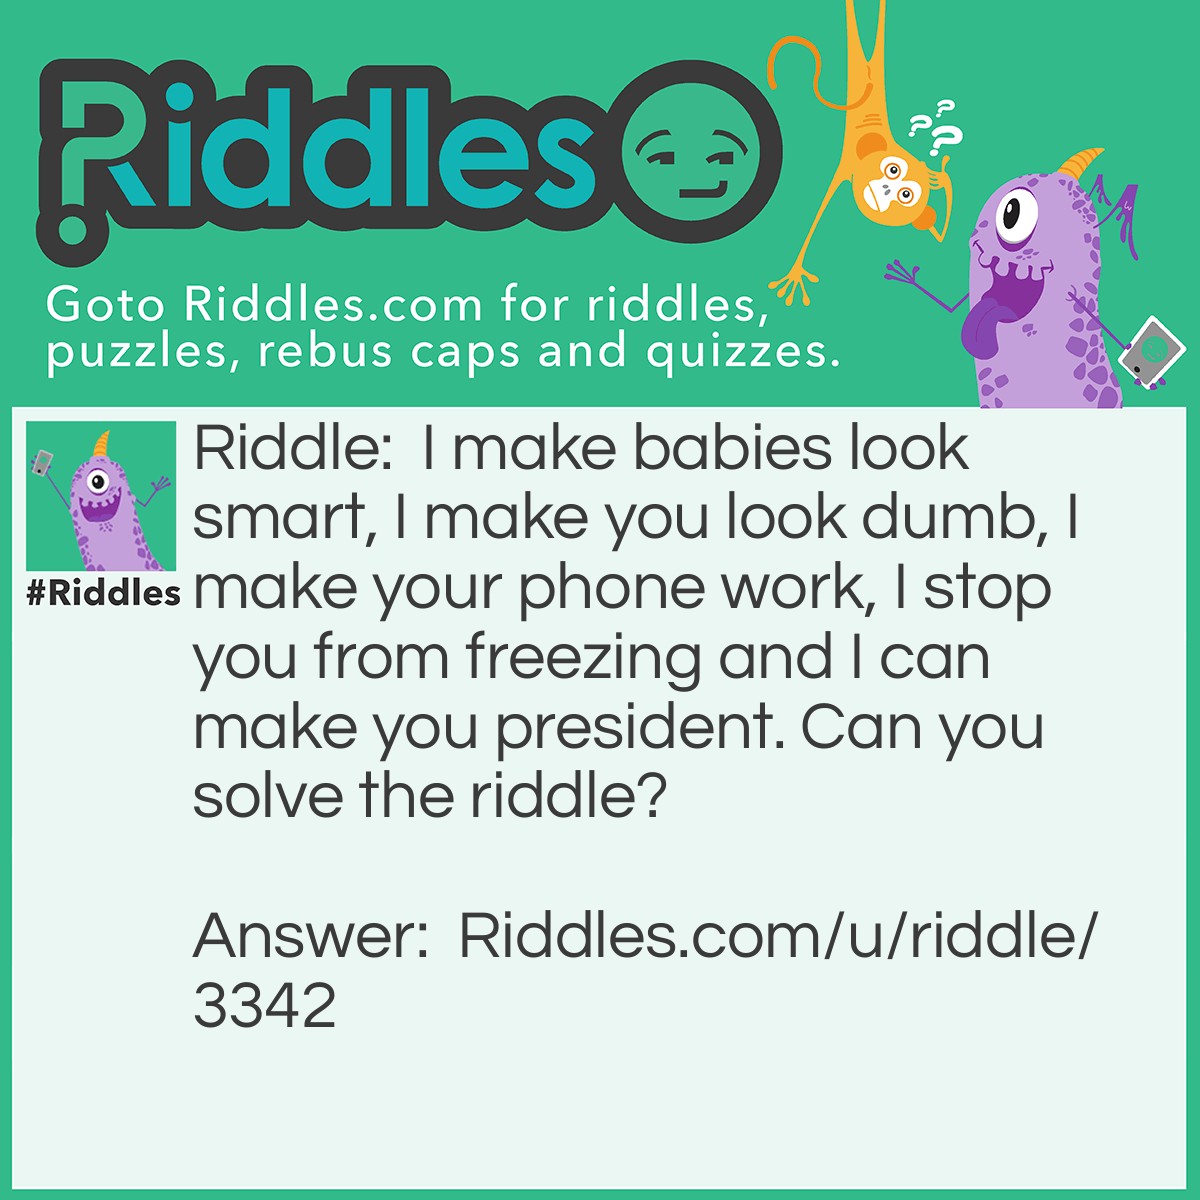 Riddle: I make babies look smart, I make you look dumb, I make your phone work, I stop you from freezing and I can make you president. Can you solve the riddle? Answer: The answer is no because the question was 'Can you solve the riddle?'